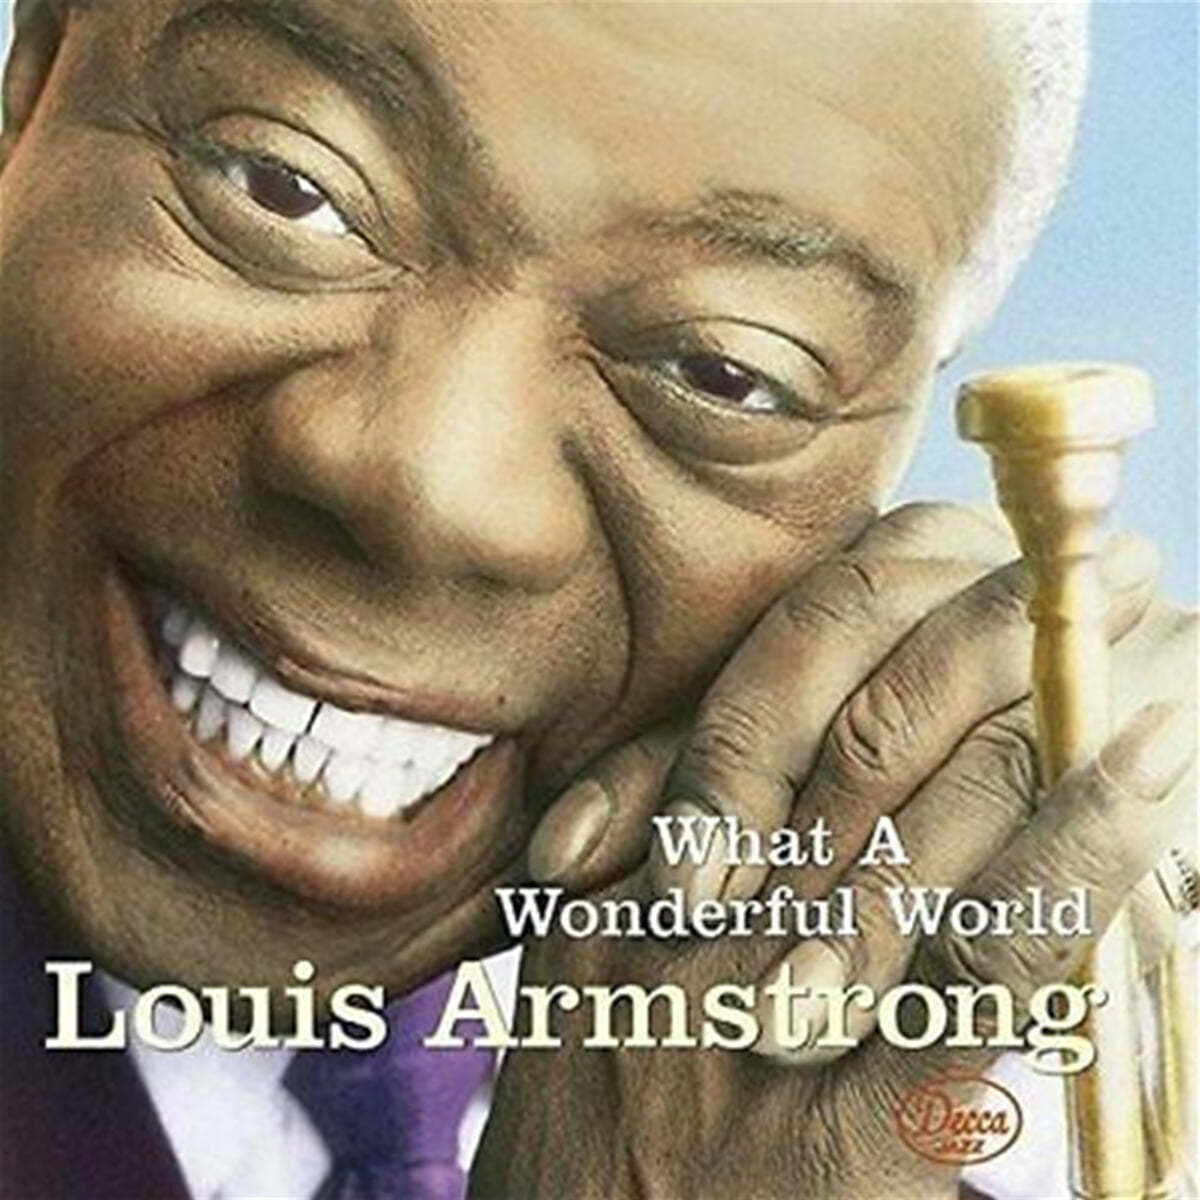 Louis Armstrong (루이 암스트롱) - What A Wonderful World